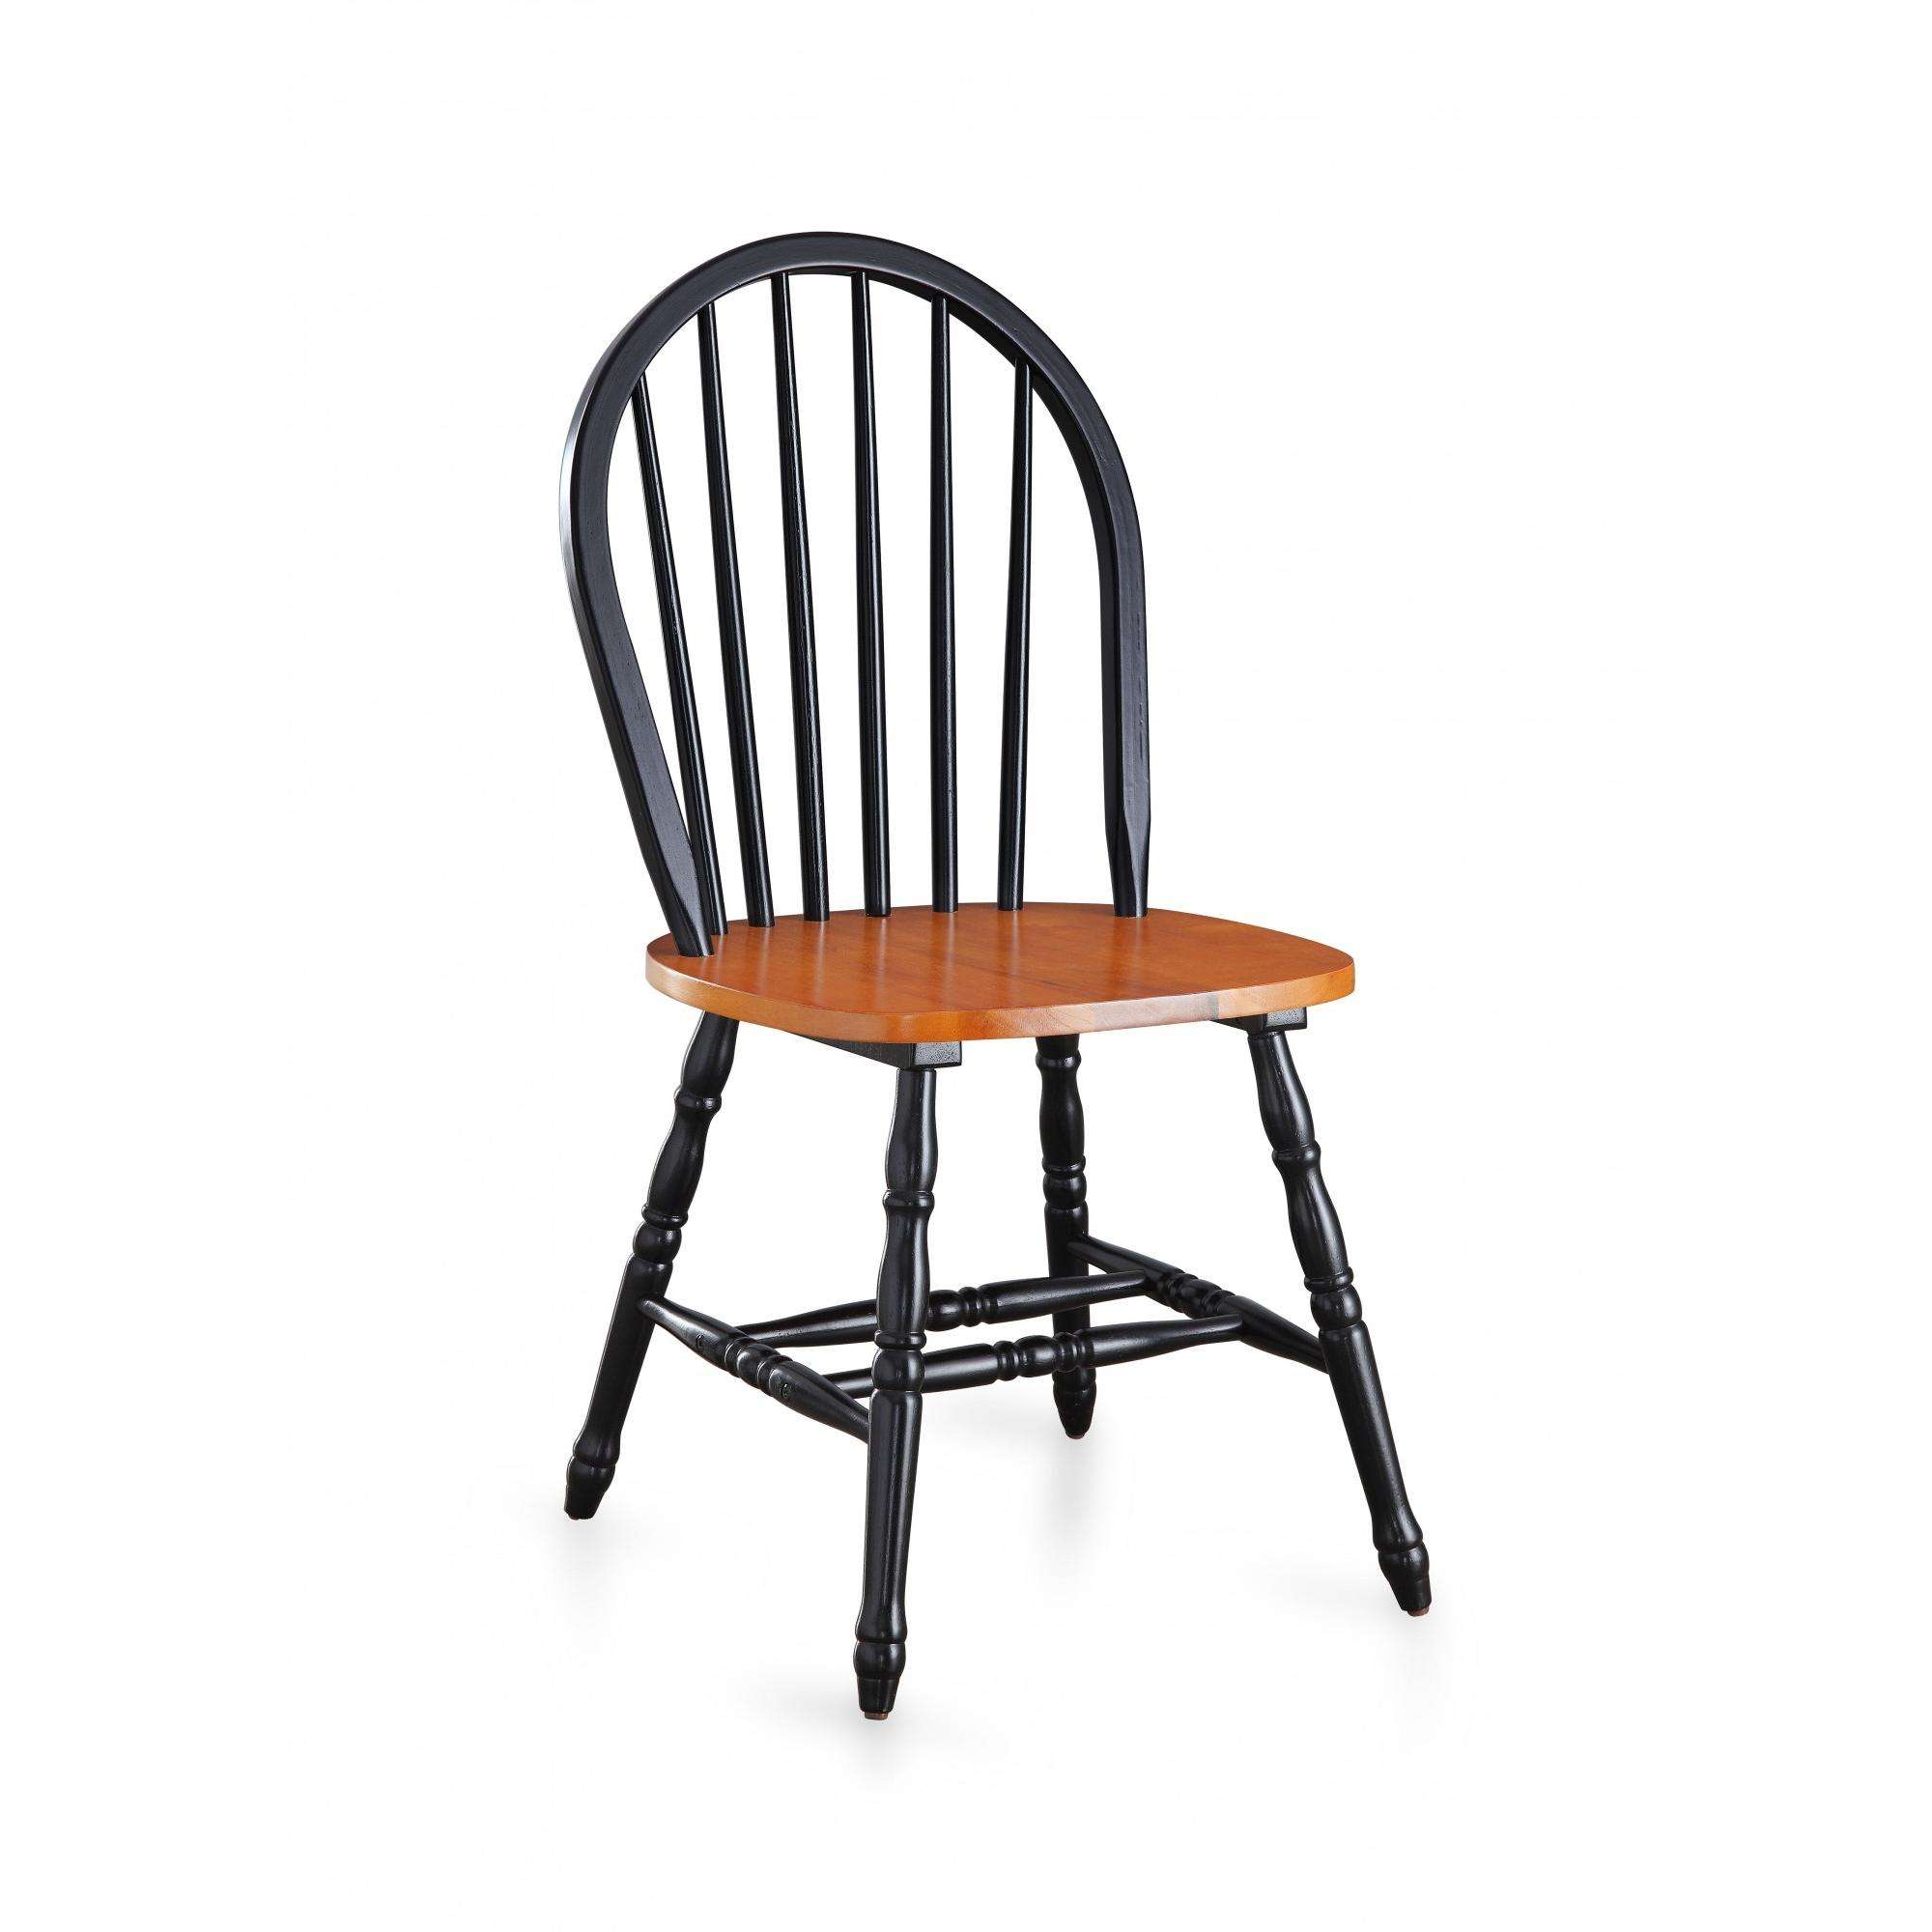 Better Homes and Gardens Autumn Lane Windsor Solid Wood Chairs, Set of 2, Black and Oak - image 3 of 8